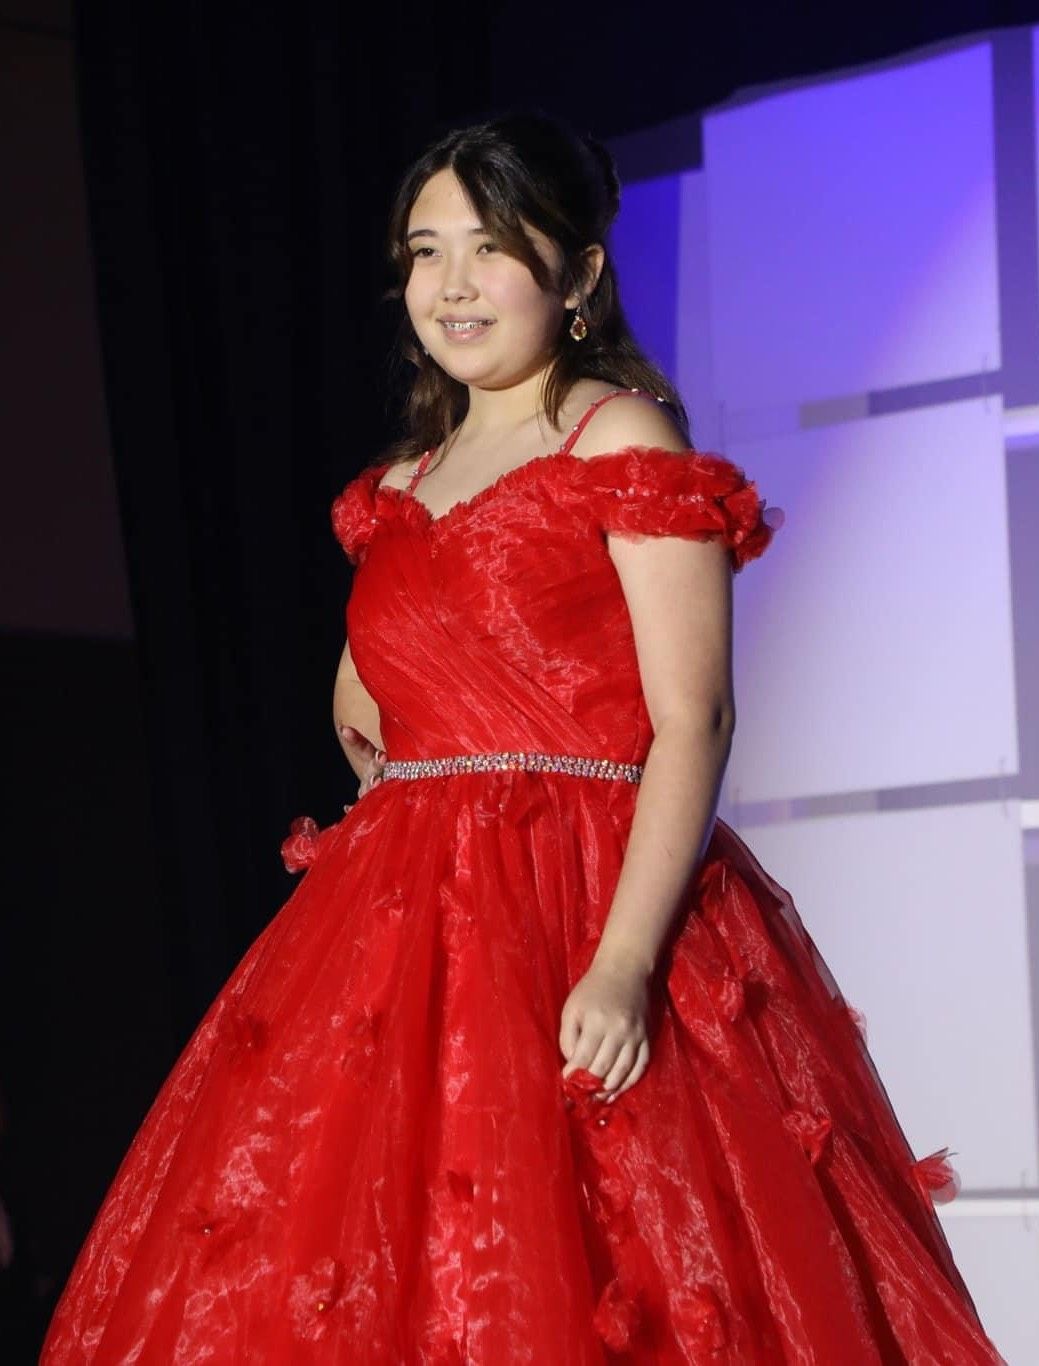 One more couture Size 4 Prom Off The Shoulder Red Ball Gown on Queenly